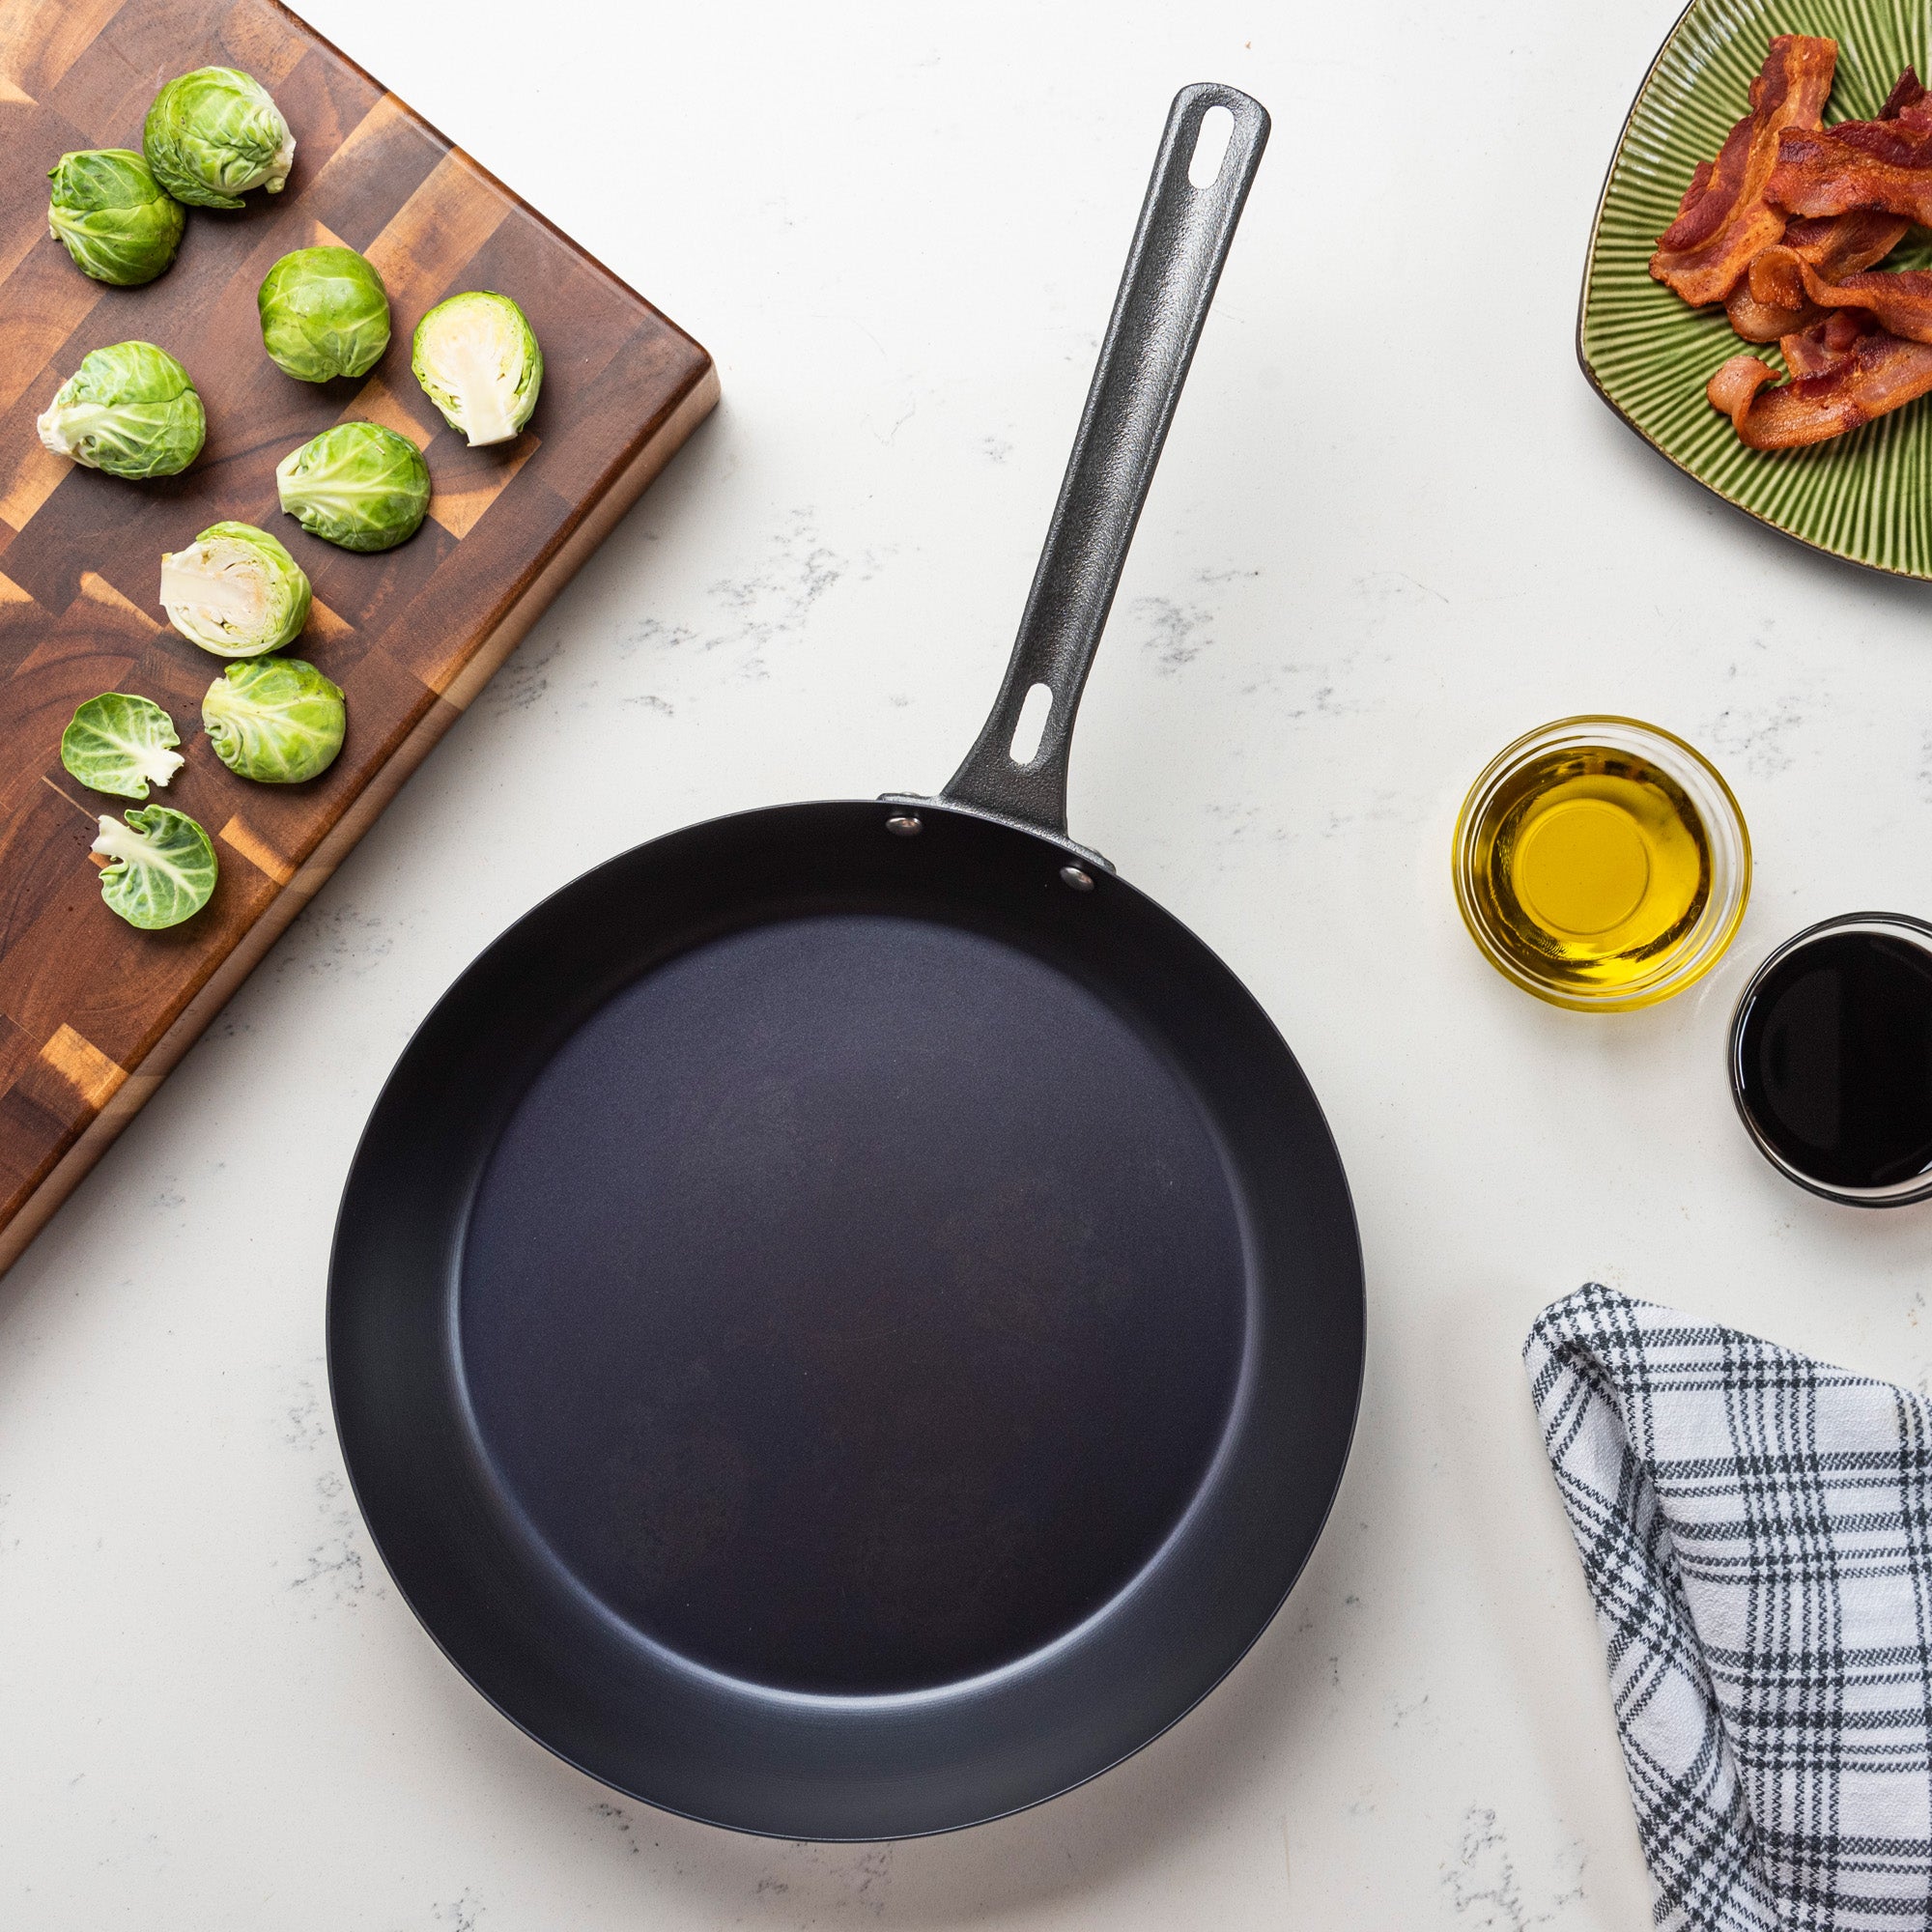 How To Clean a Carbon Steel Pan